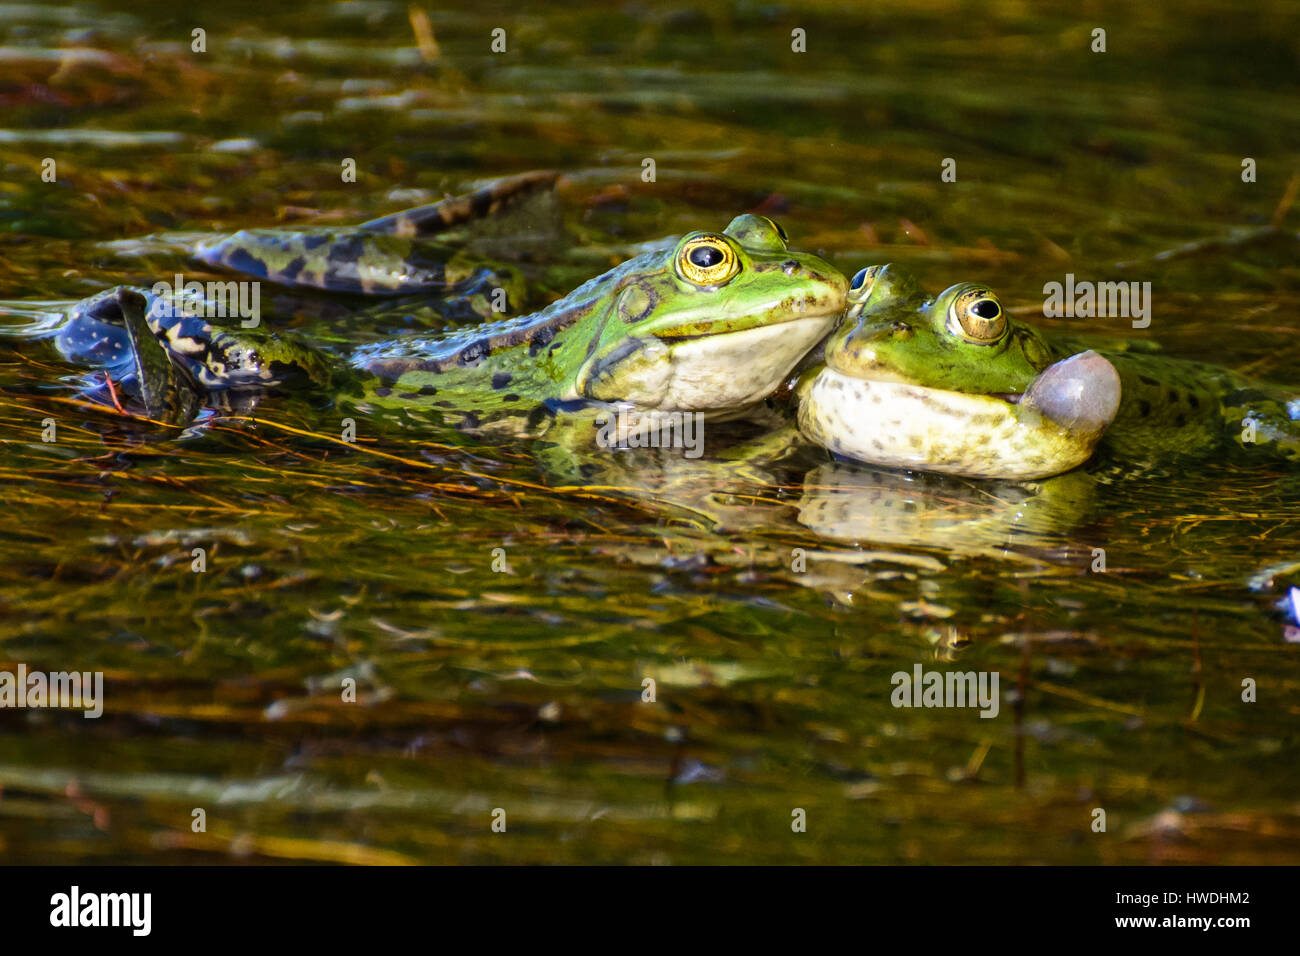 Color image of a frog couple being tender - Give me a Hug Stock Photo